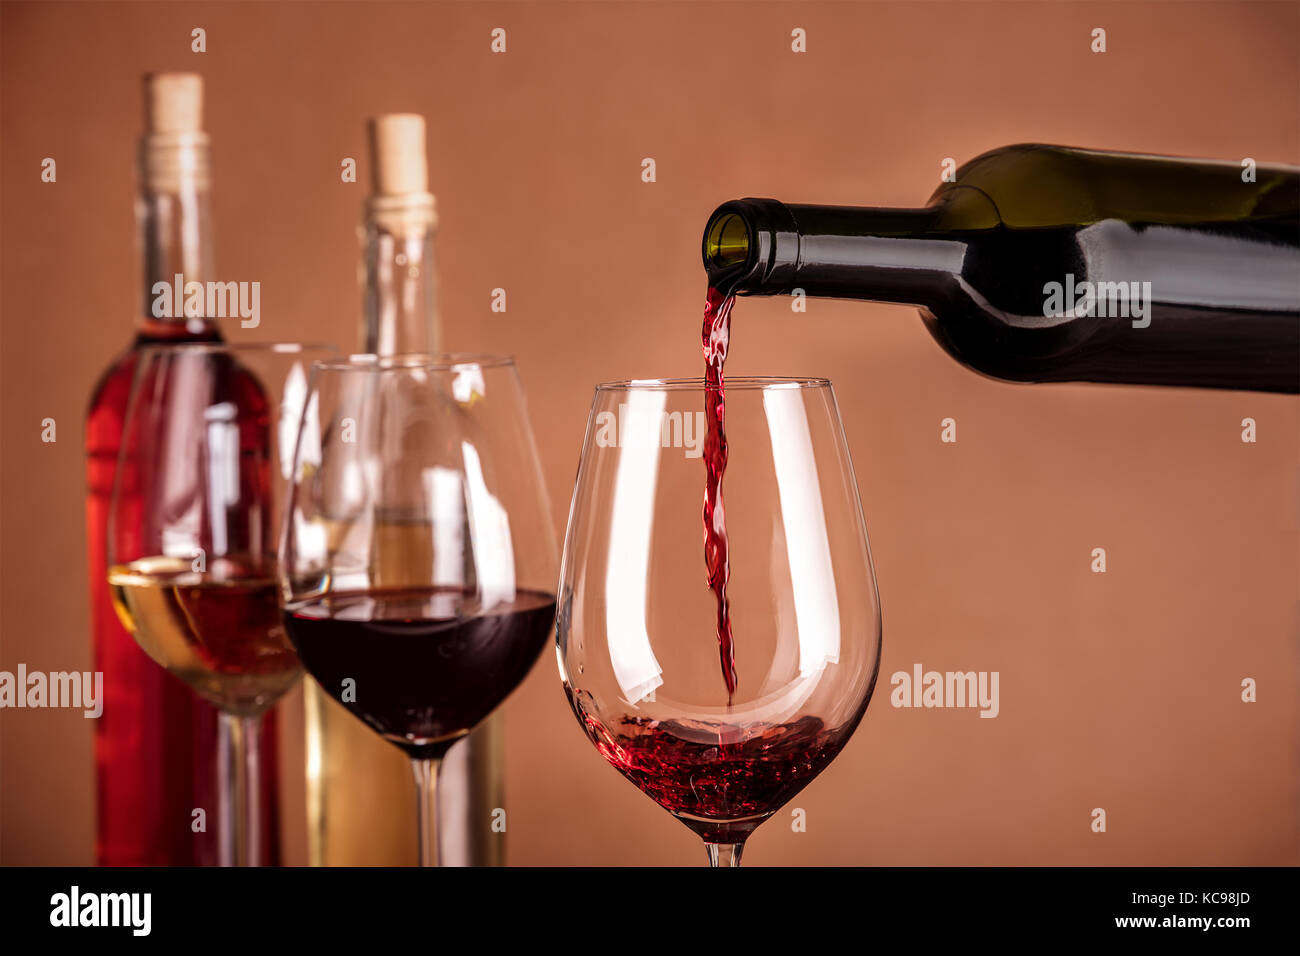 Red wine being poured into a glass from a bottle, on a dark background, with copy space and other glasses and more bottles in the blurred background.  Stock Photo